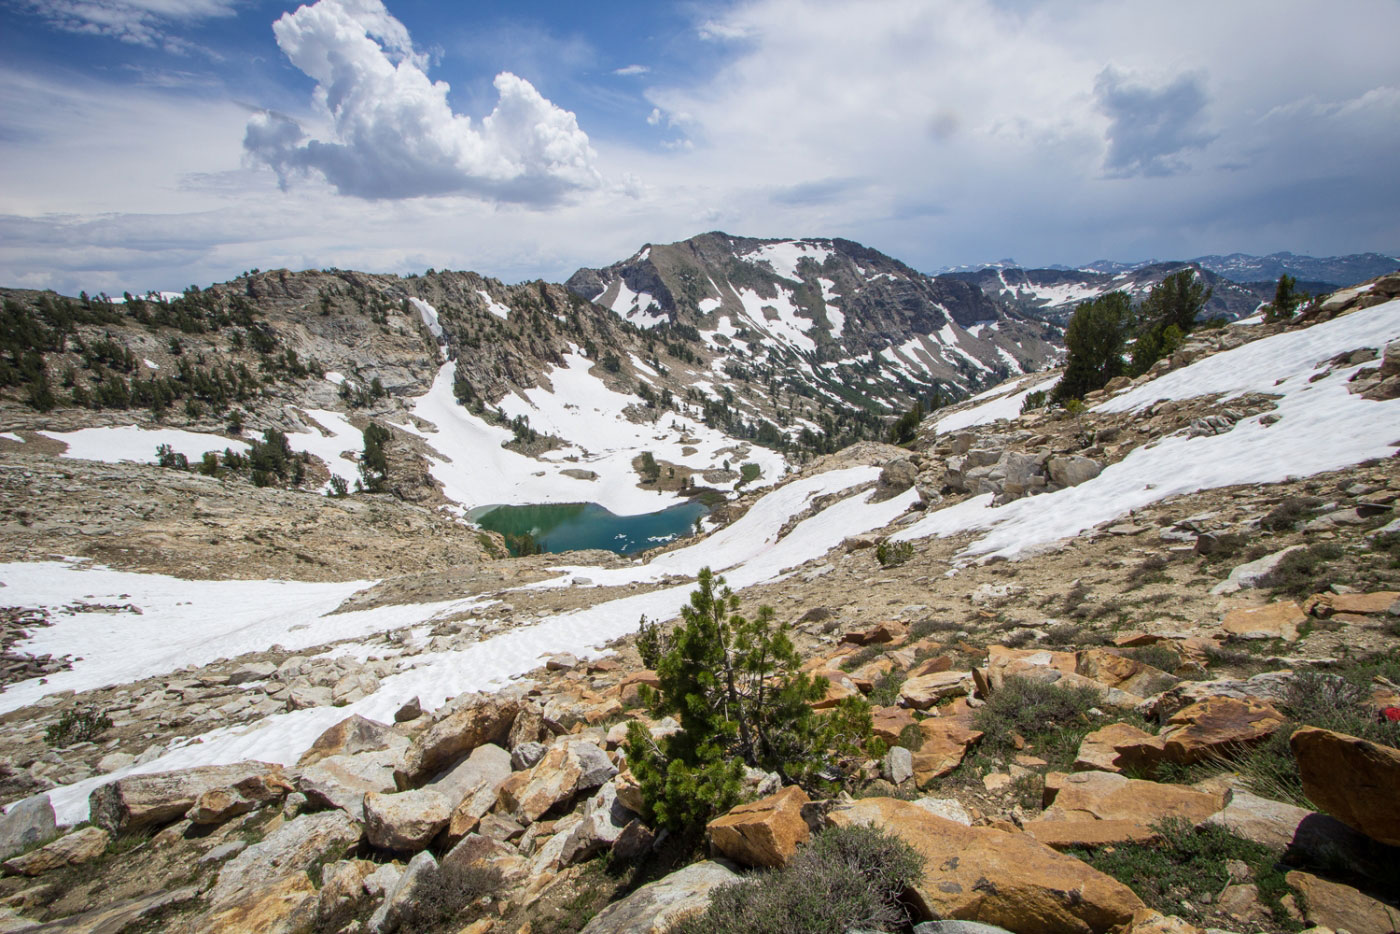 Hike Lakes Loop of Ruby Mountains Wilderness in Humboldt-Toiyabe National Forest, Nevada - Stav is Lost